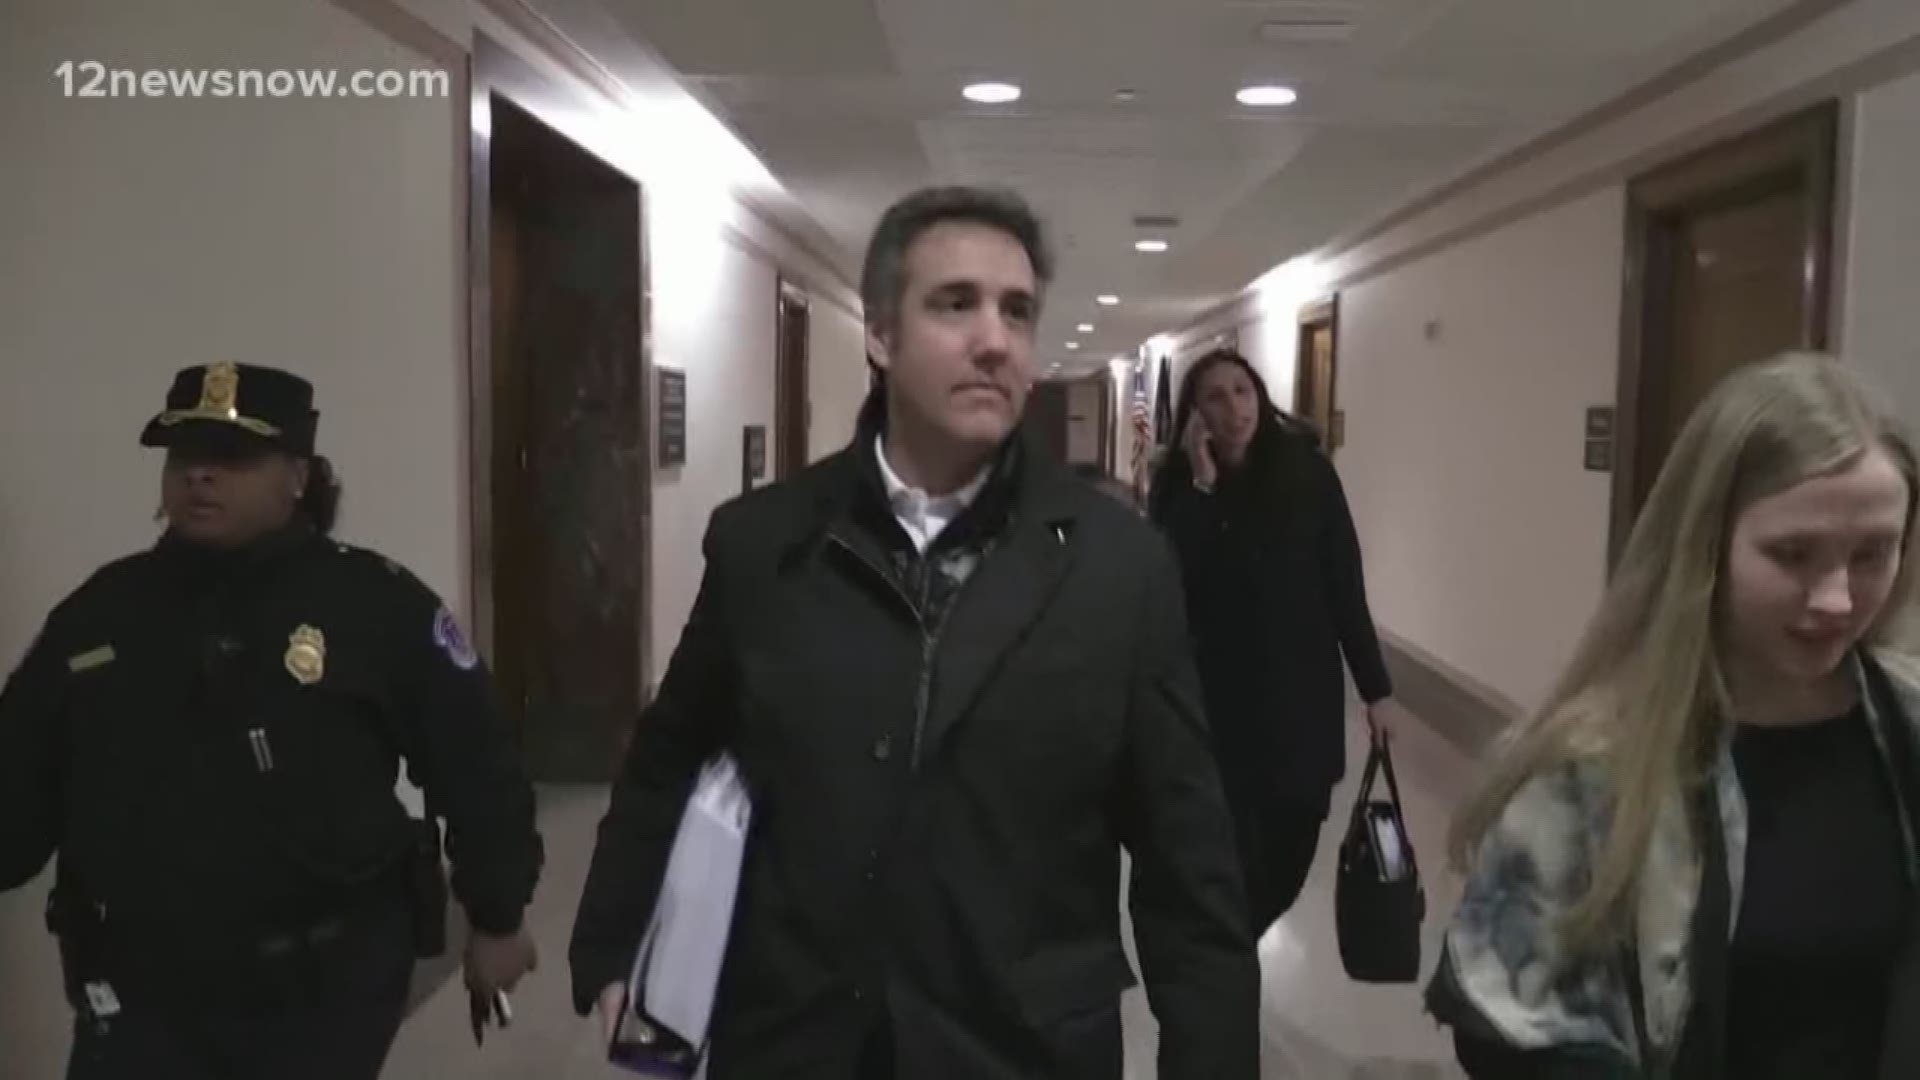 Michael Cohen, President Trump's former lawyer, prepares a "tell all" for congress this week. He's expected to testify both publicly and privately.